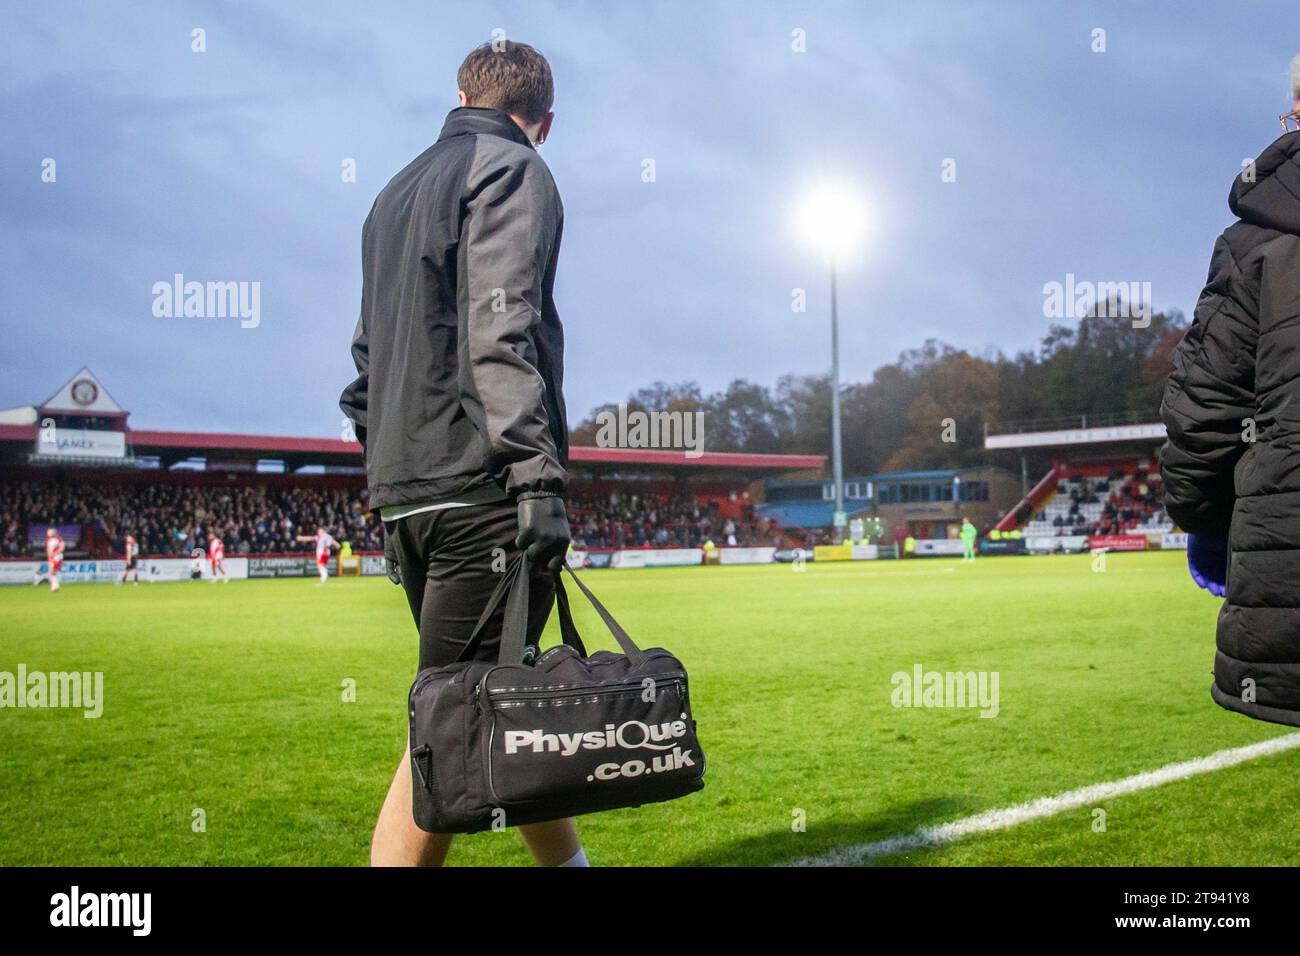 Professional sports team physiotherapist waiting for permission to enter field of play to treat injured footballer Stock Photo